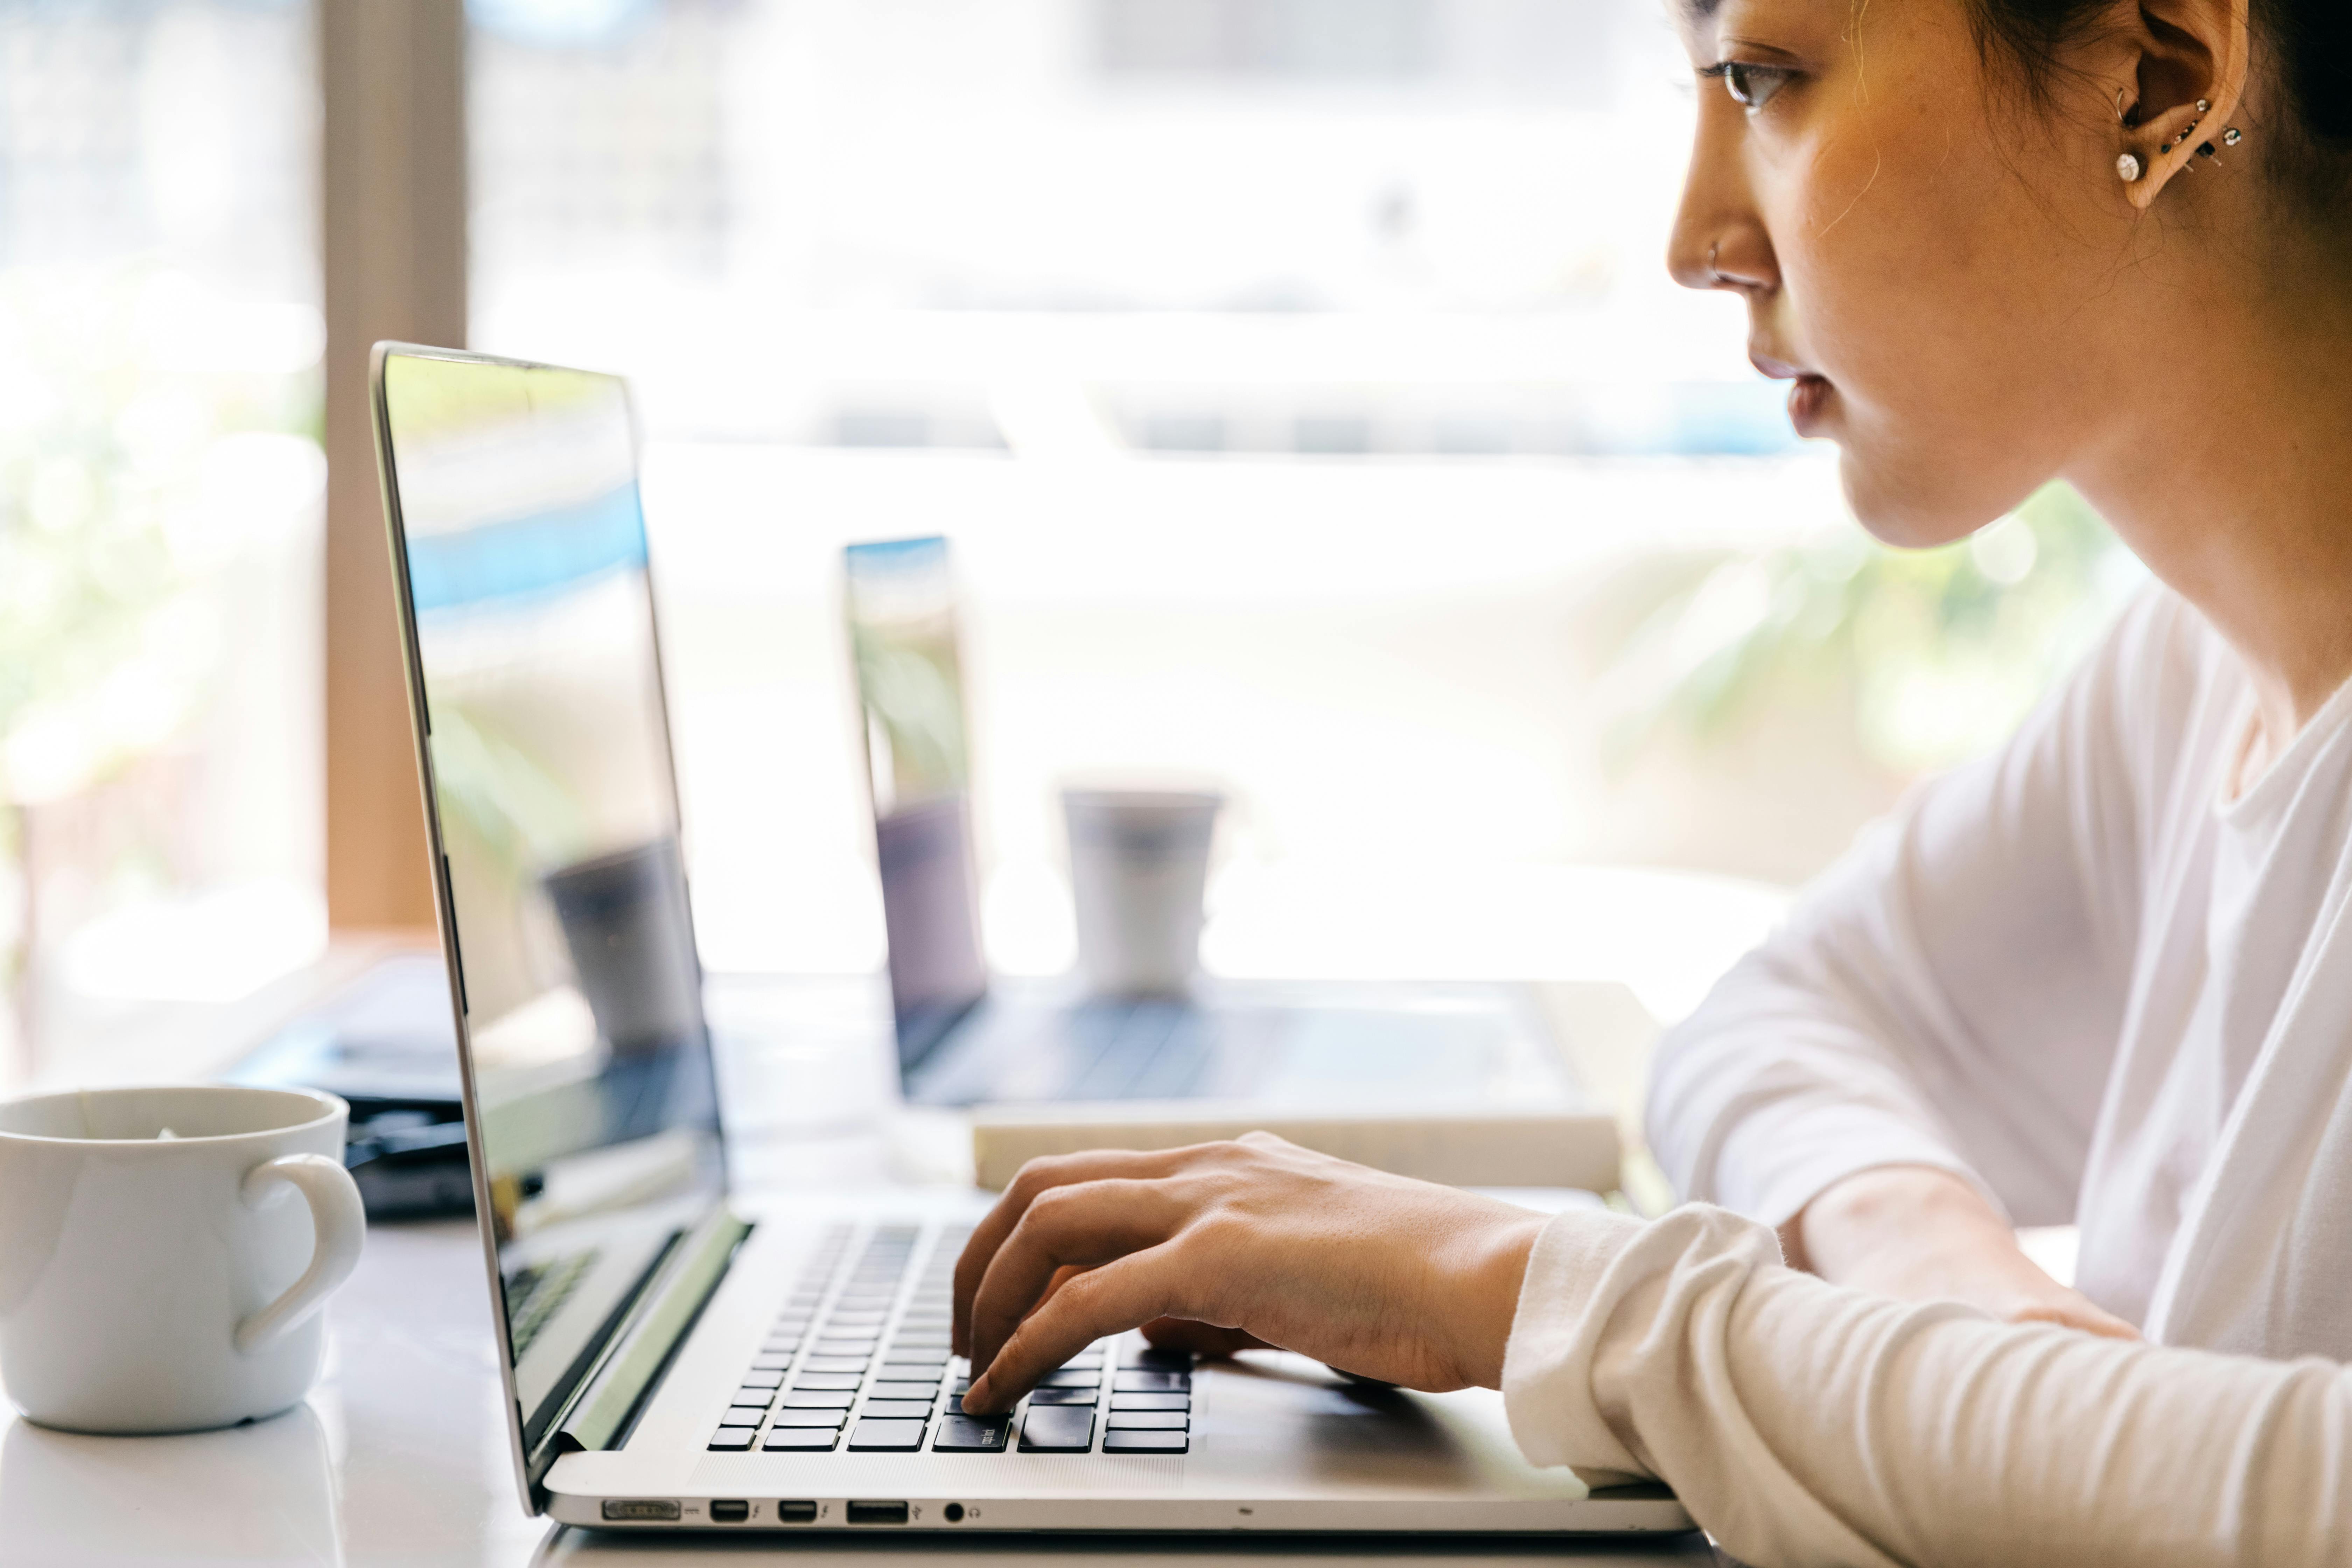 A woman looking at something on a laptop computer | Source: Pexels